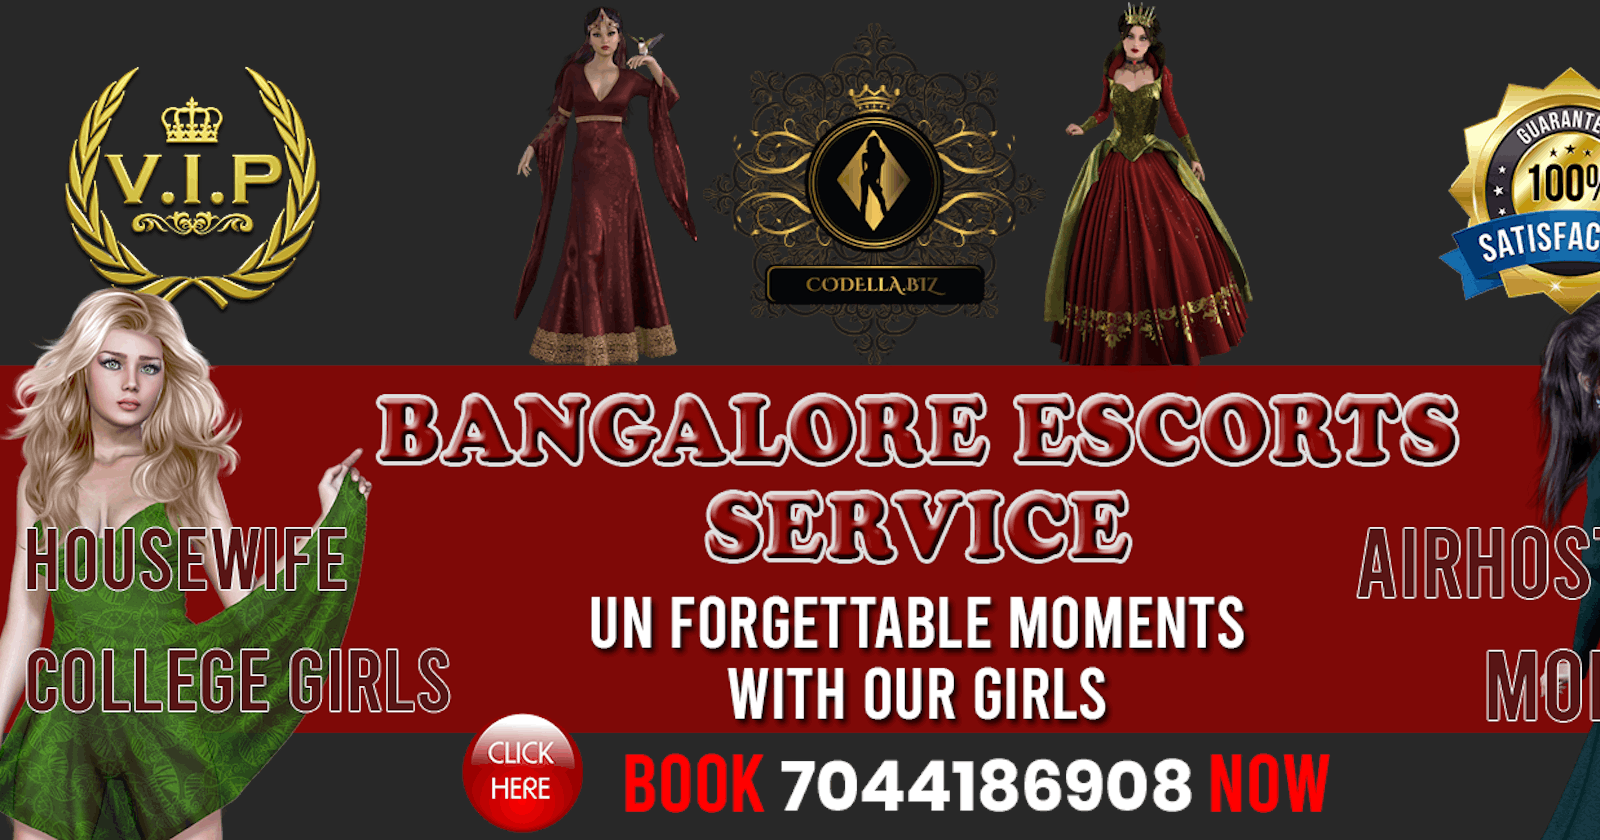 How to Find Honest Escort Services in Bangalore